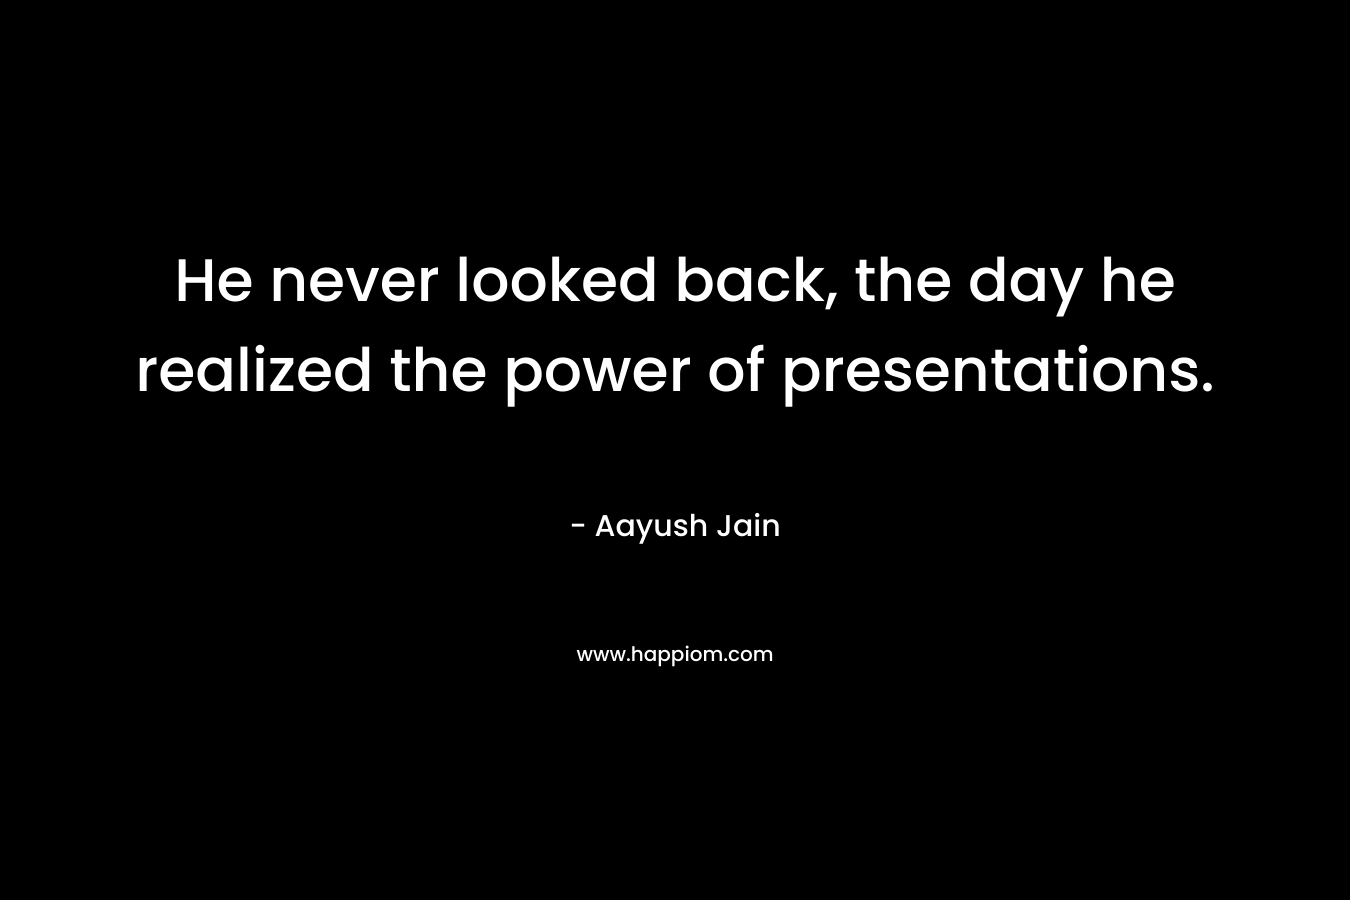 He never looked back, the day he realized the power of presentations.